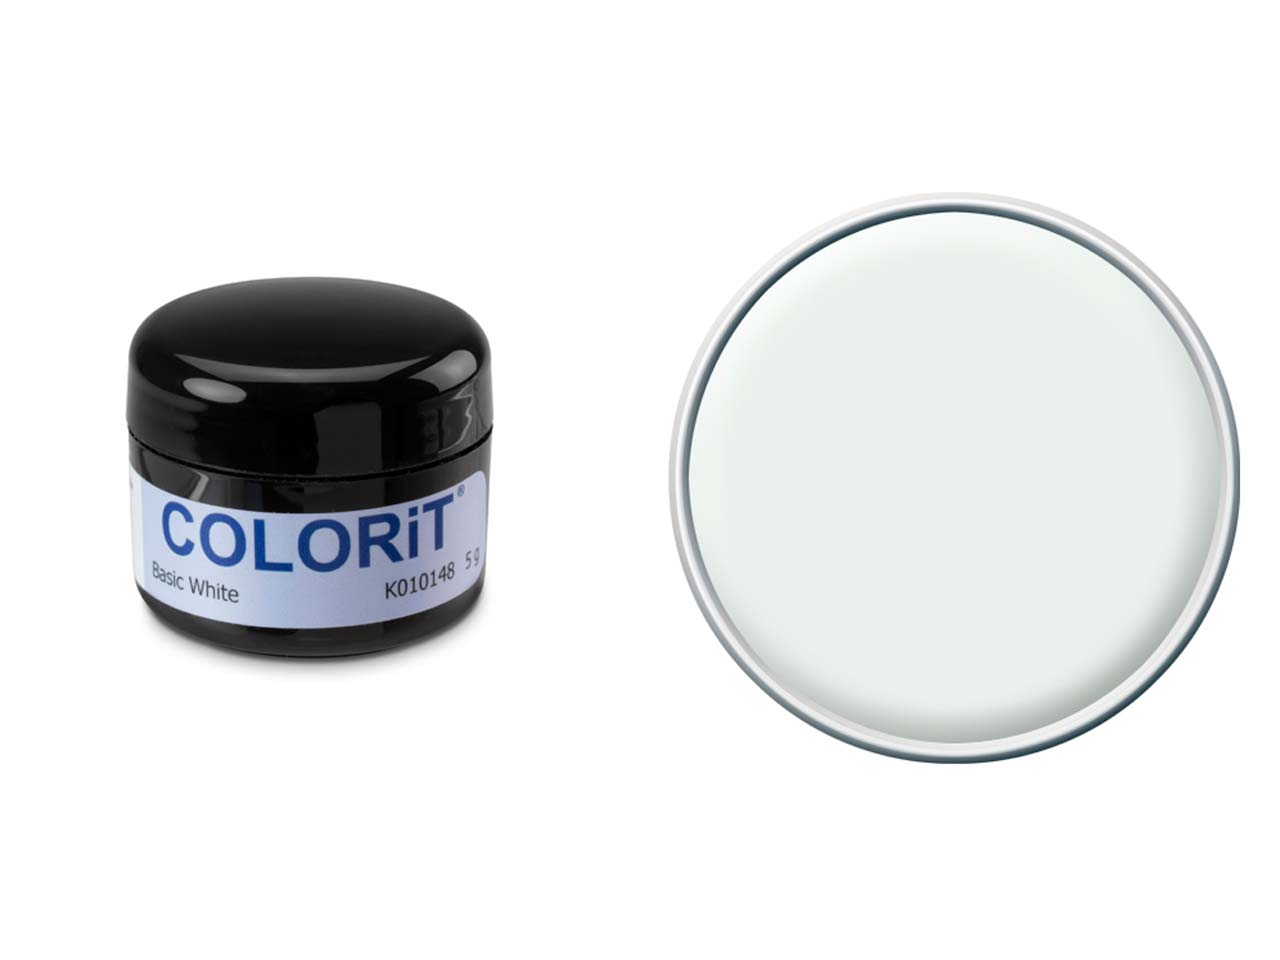 Do you have any further information about the COLORIT� range?